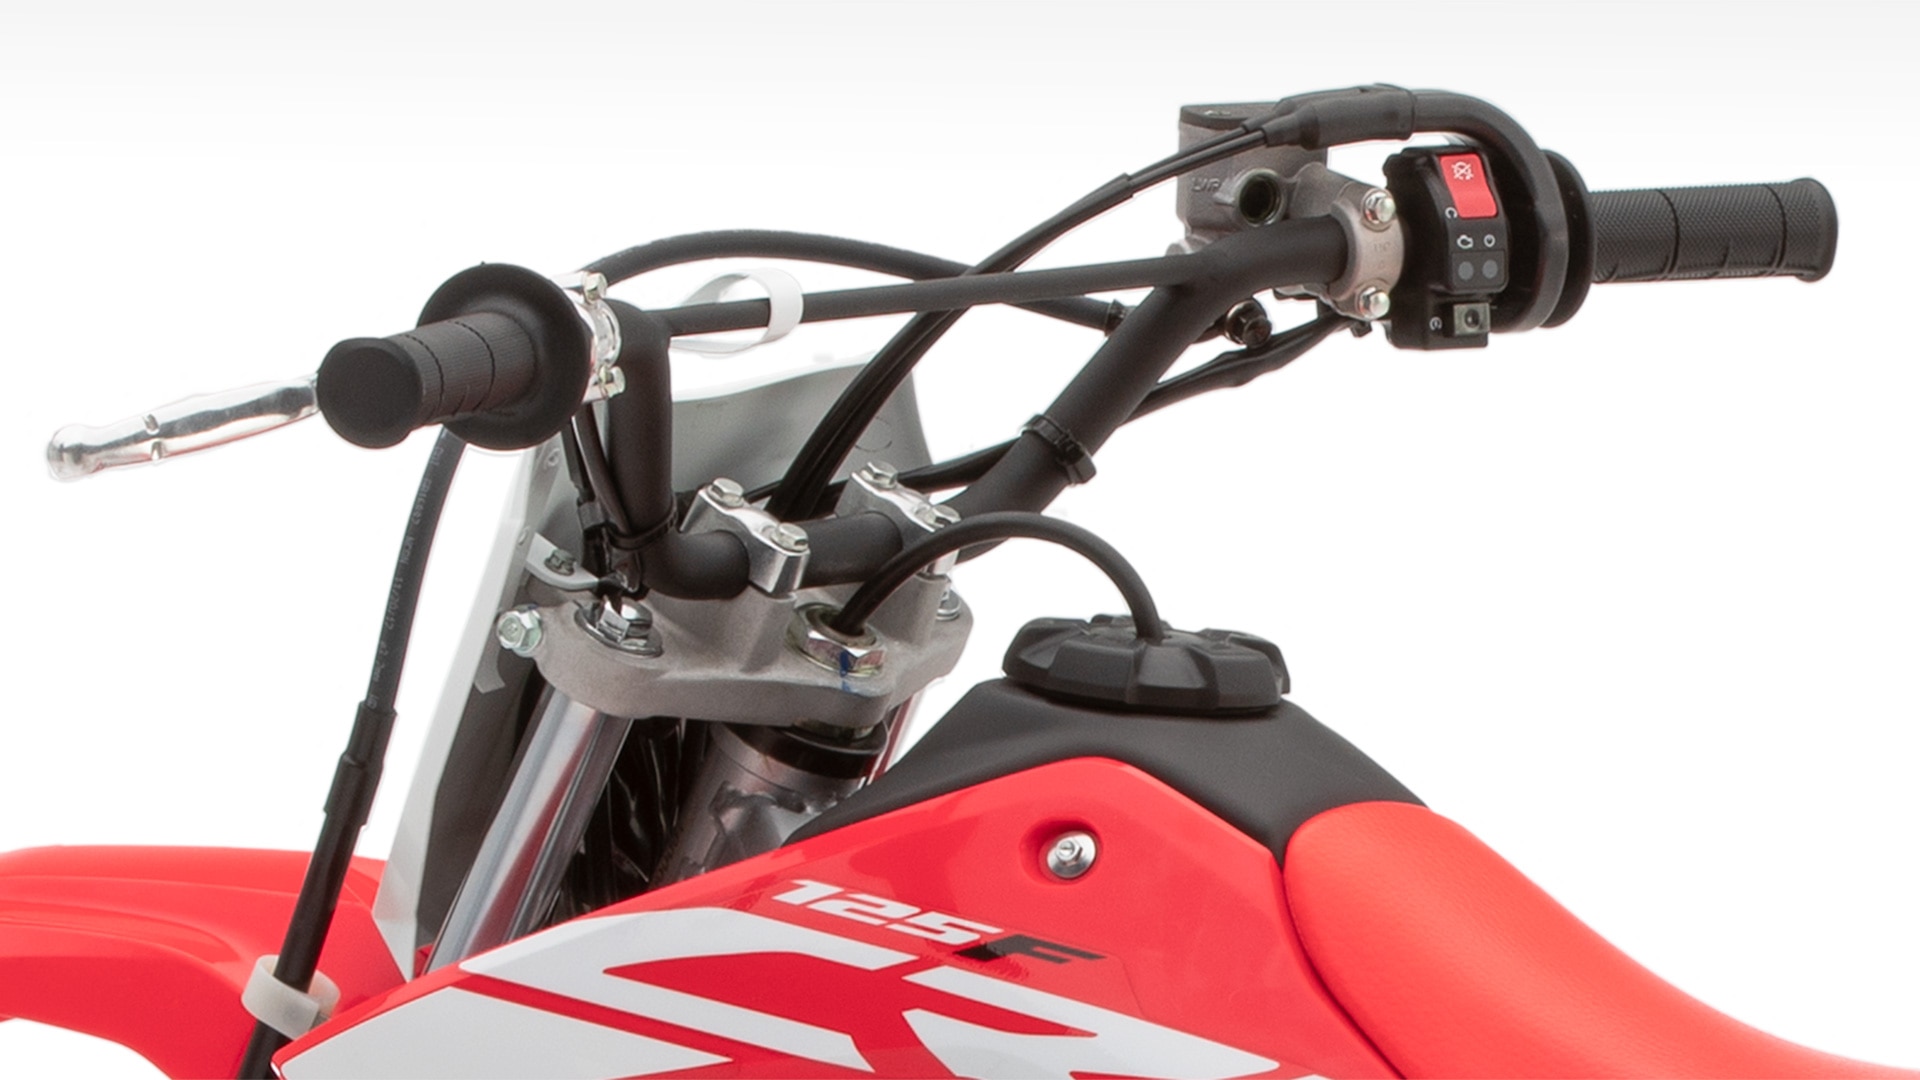 Close-up of handlebars and electric starter button.